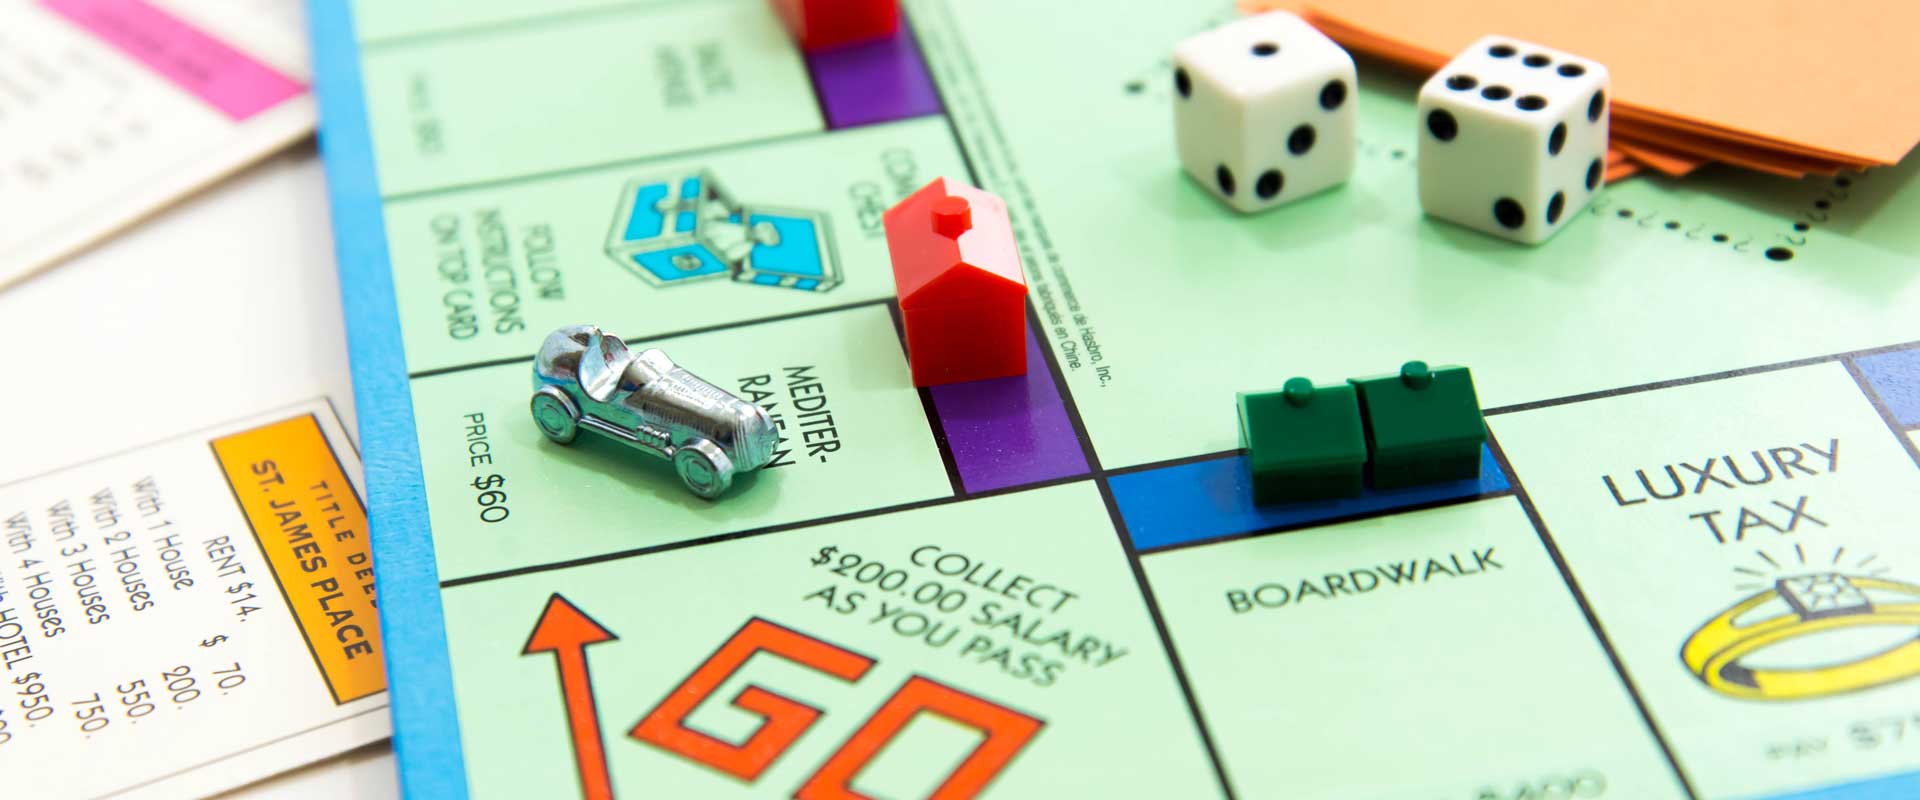 Monopoly board game with dice, money and houses